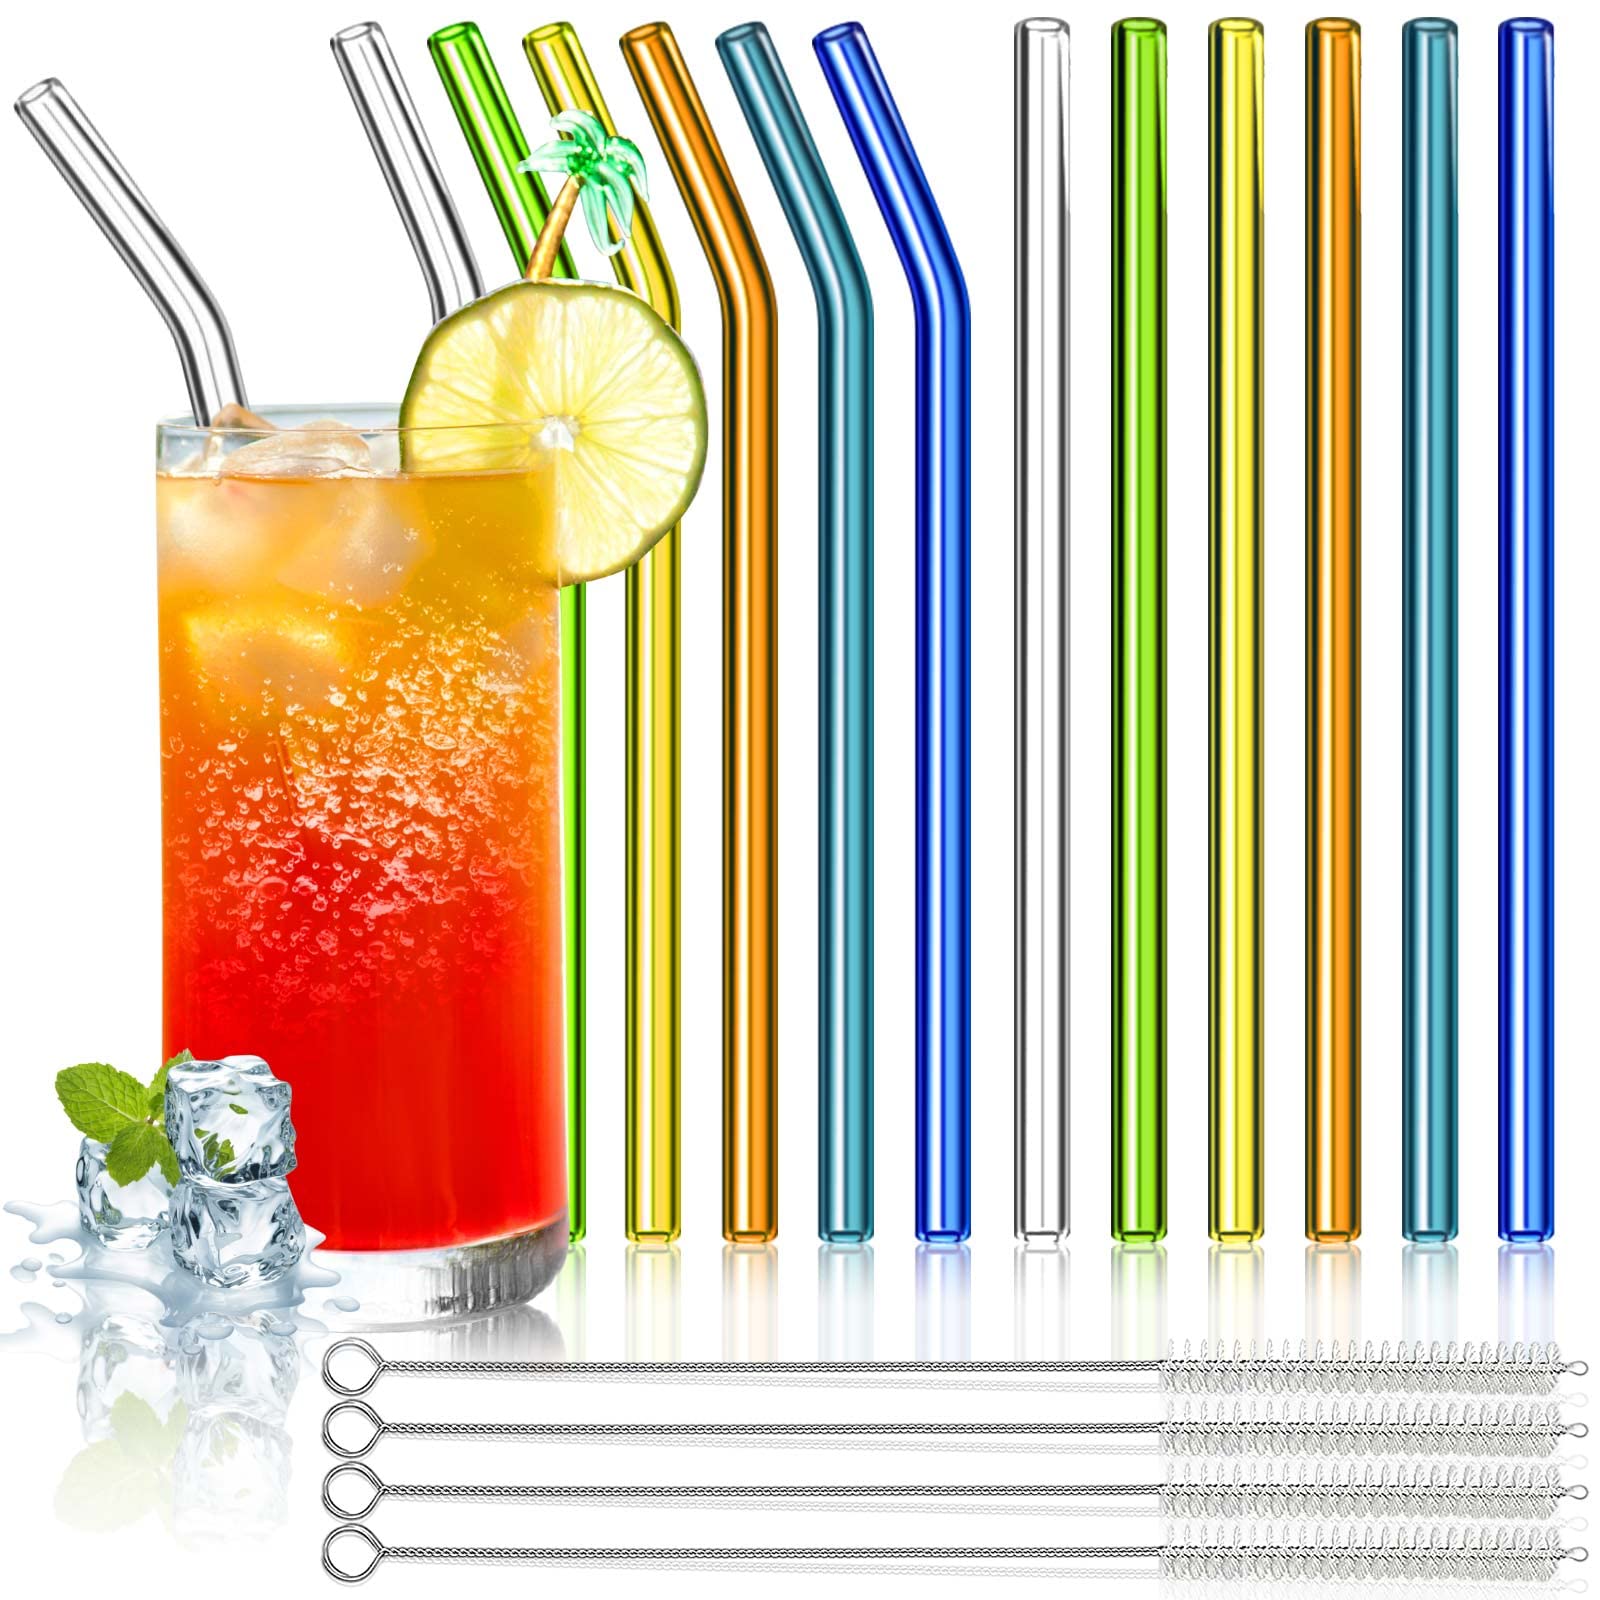 Panesor Glass Straws, 12PCS Reusable Drinking Straws with 4 Cleaning Brushes 8.5''x10 MM Multi-color 6 Straight and 6 Bent Replacement for Milkshakes Coffee Drinks Smoothies Juice 20 24 30oz Tumbler